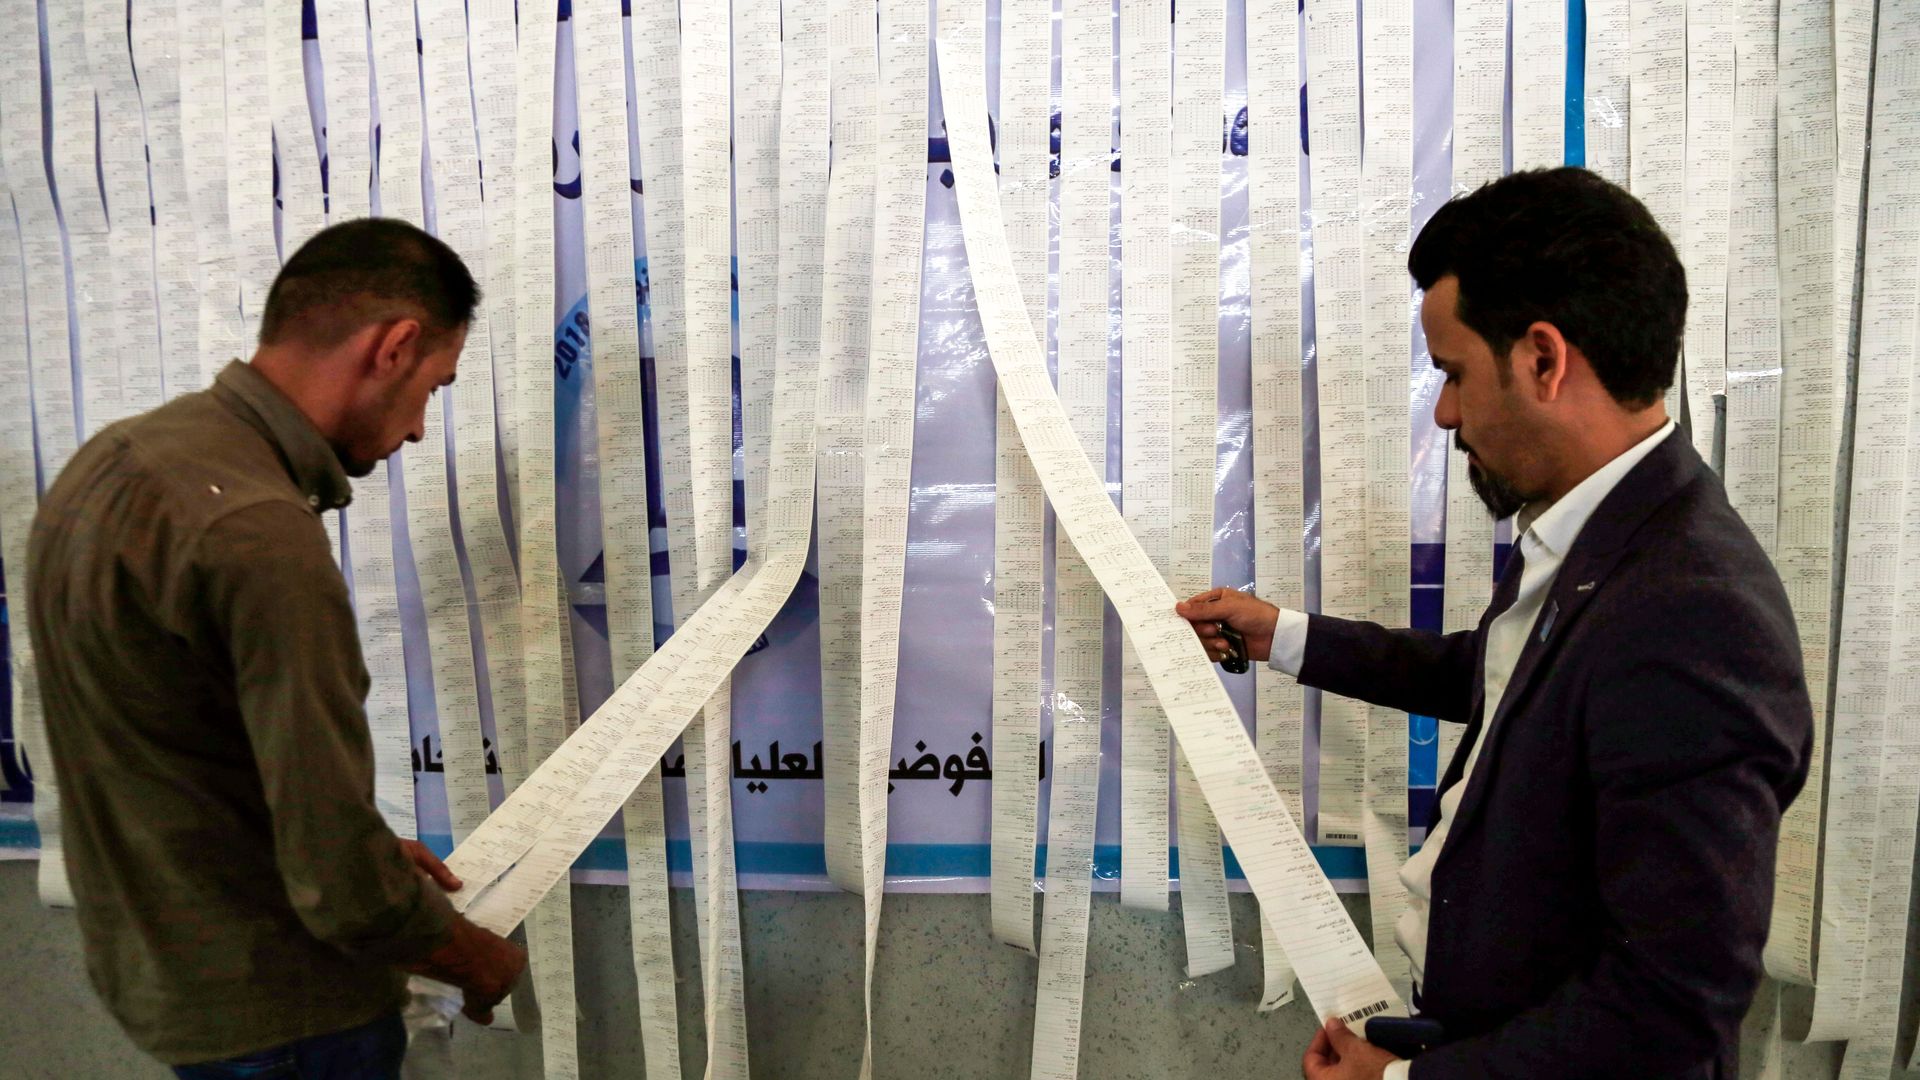 Iraqi electoral commission employees examine electronic counting machine print-outs in the central holy city of Najaf on May 13, 2018.